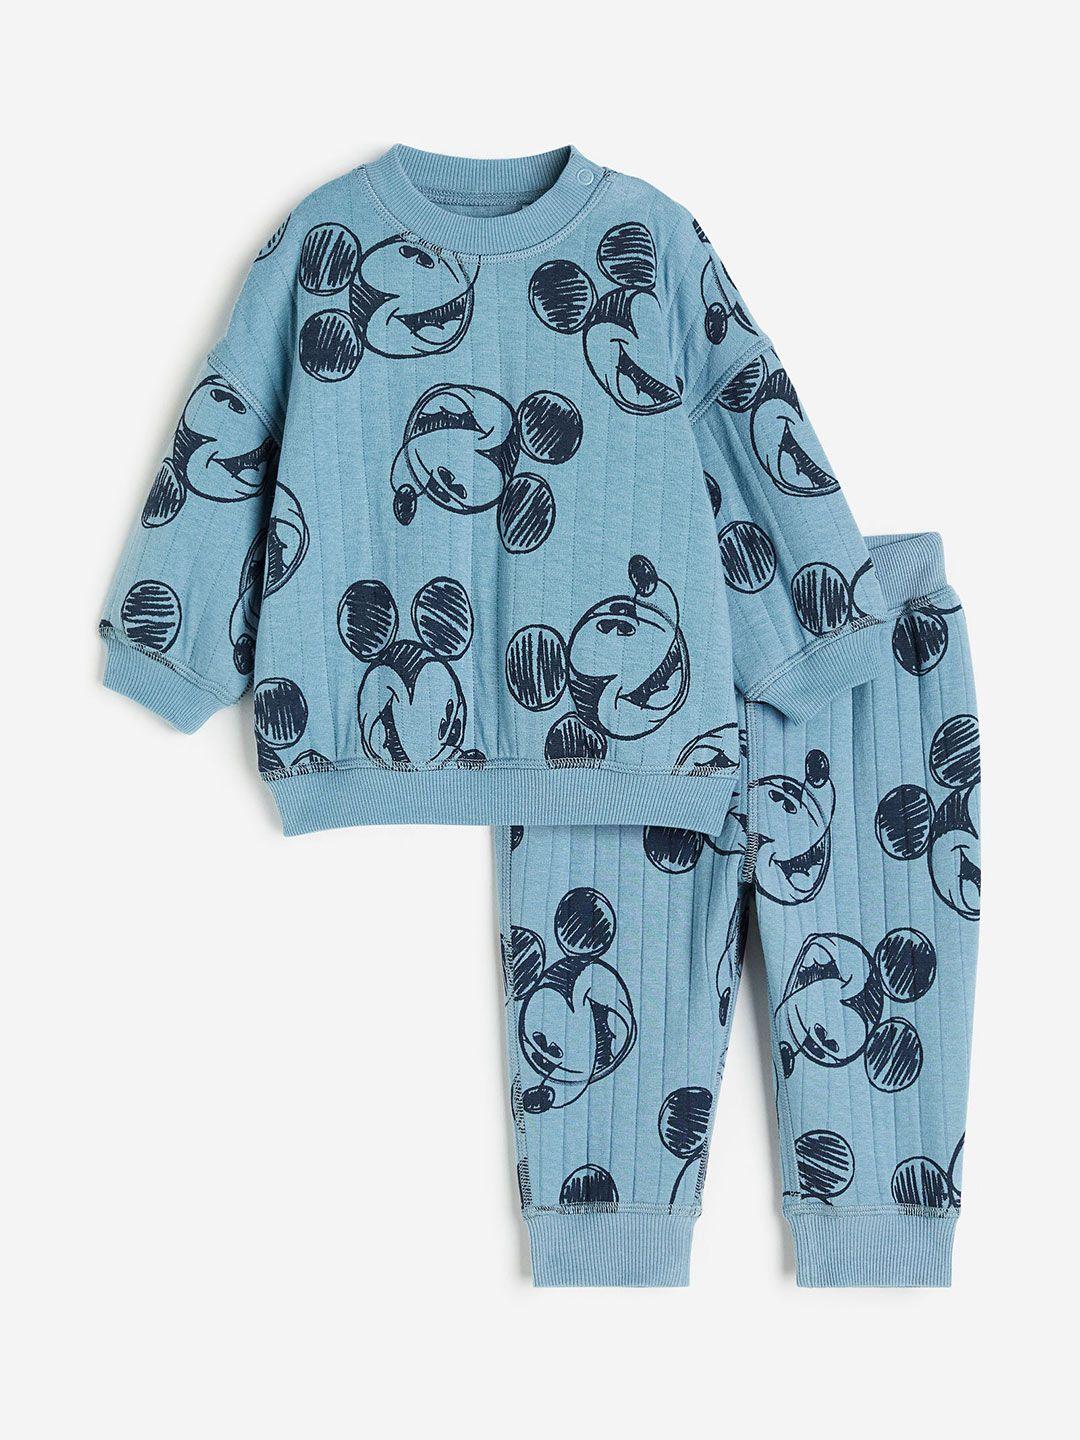 h&m boys mickey mouse printed sweatshirt with joggers clothing set